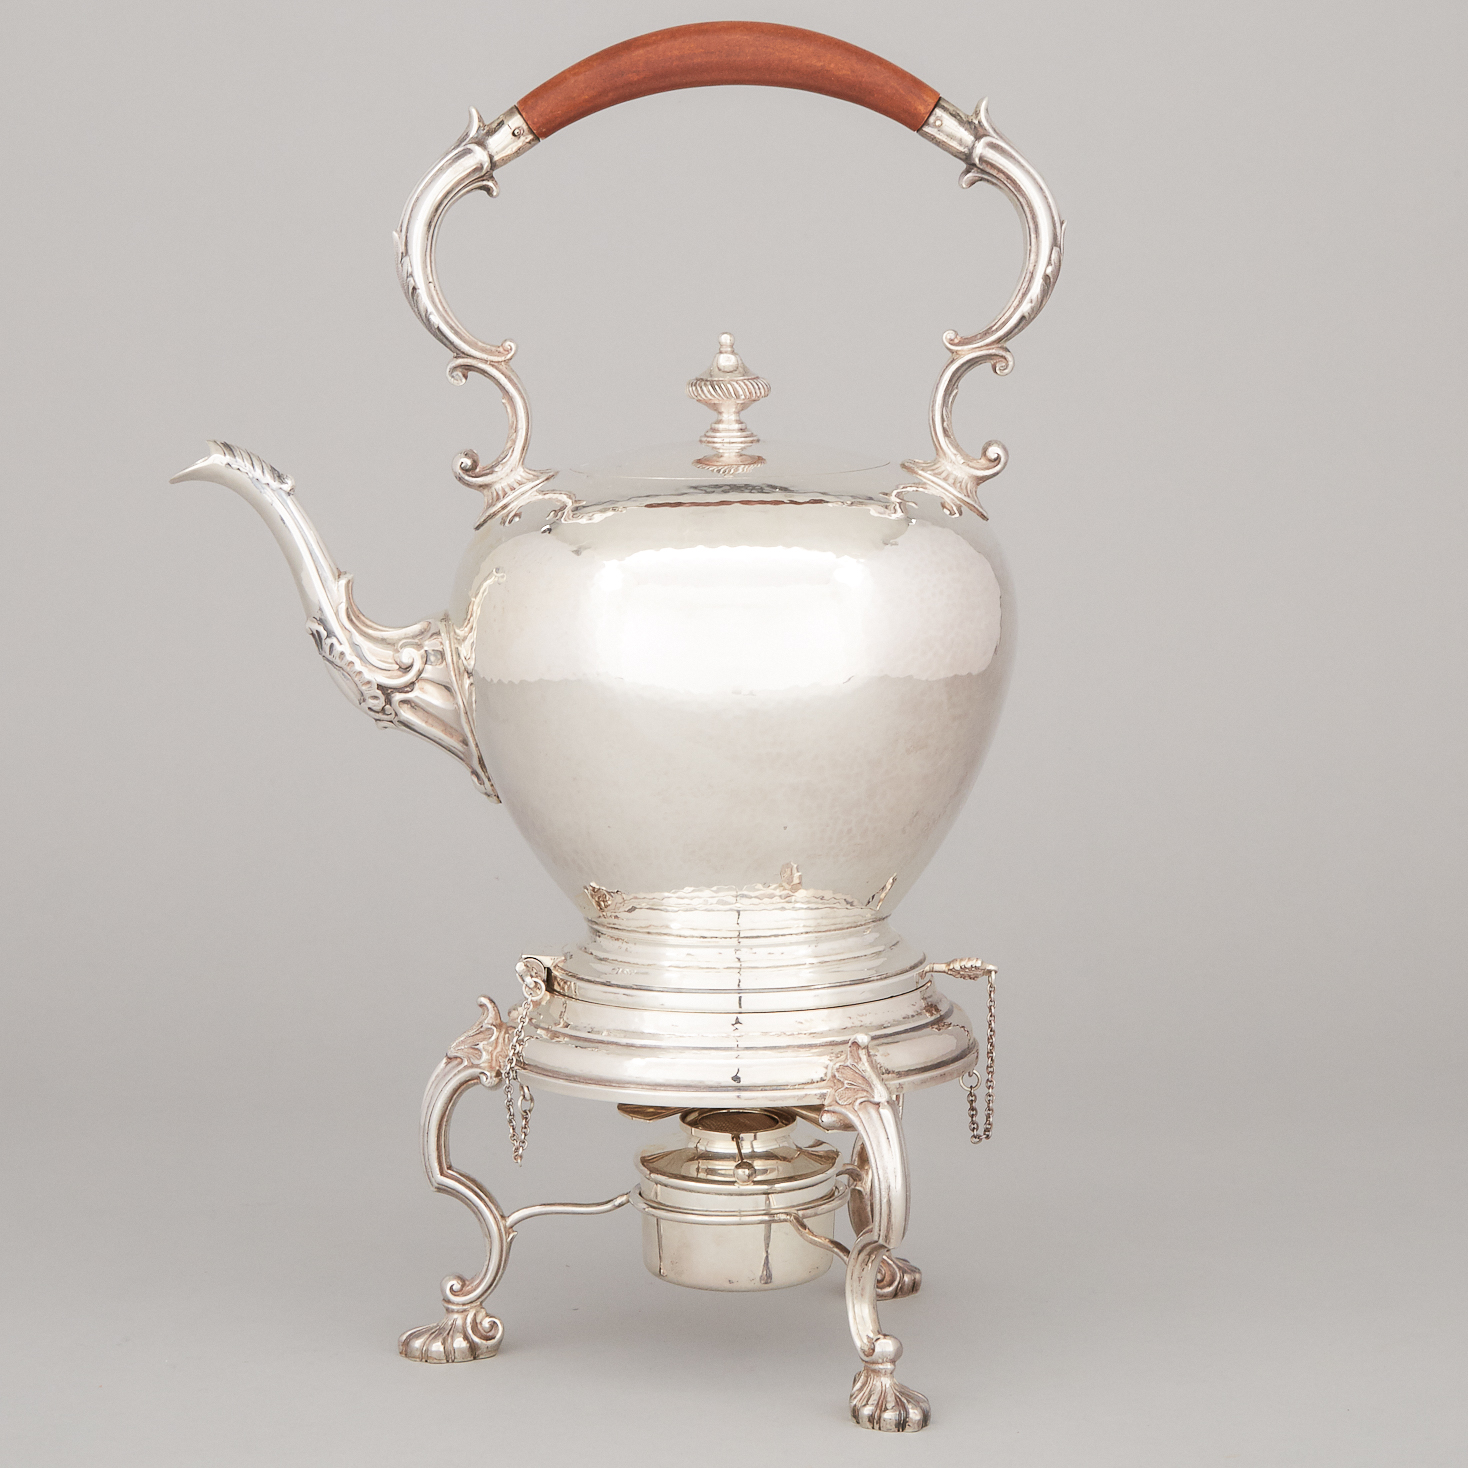 Canadian Silver Tea Kettle on Lampstand, Henry Birks & Sons, Montreal, Que., 1948